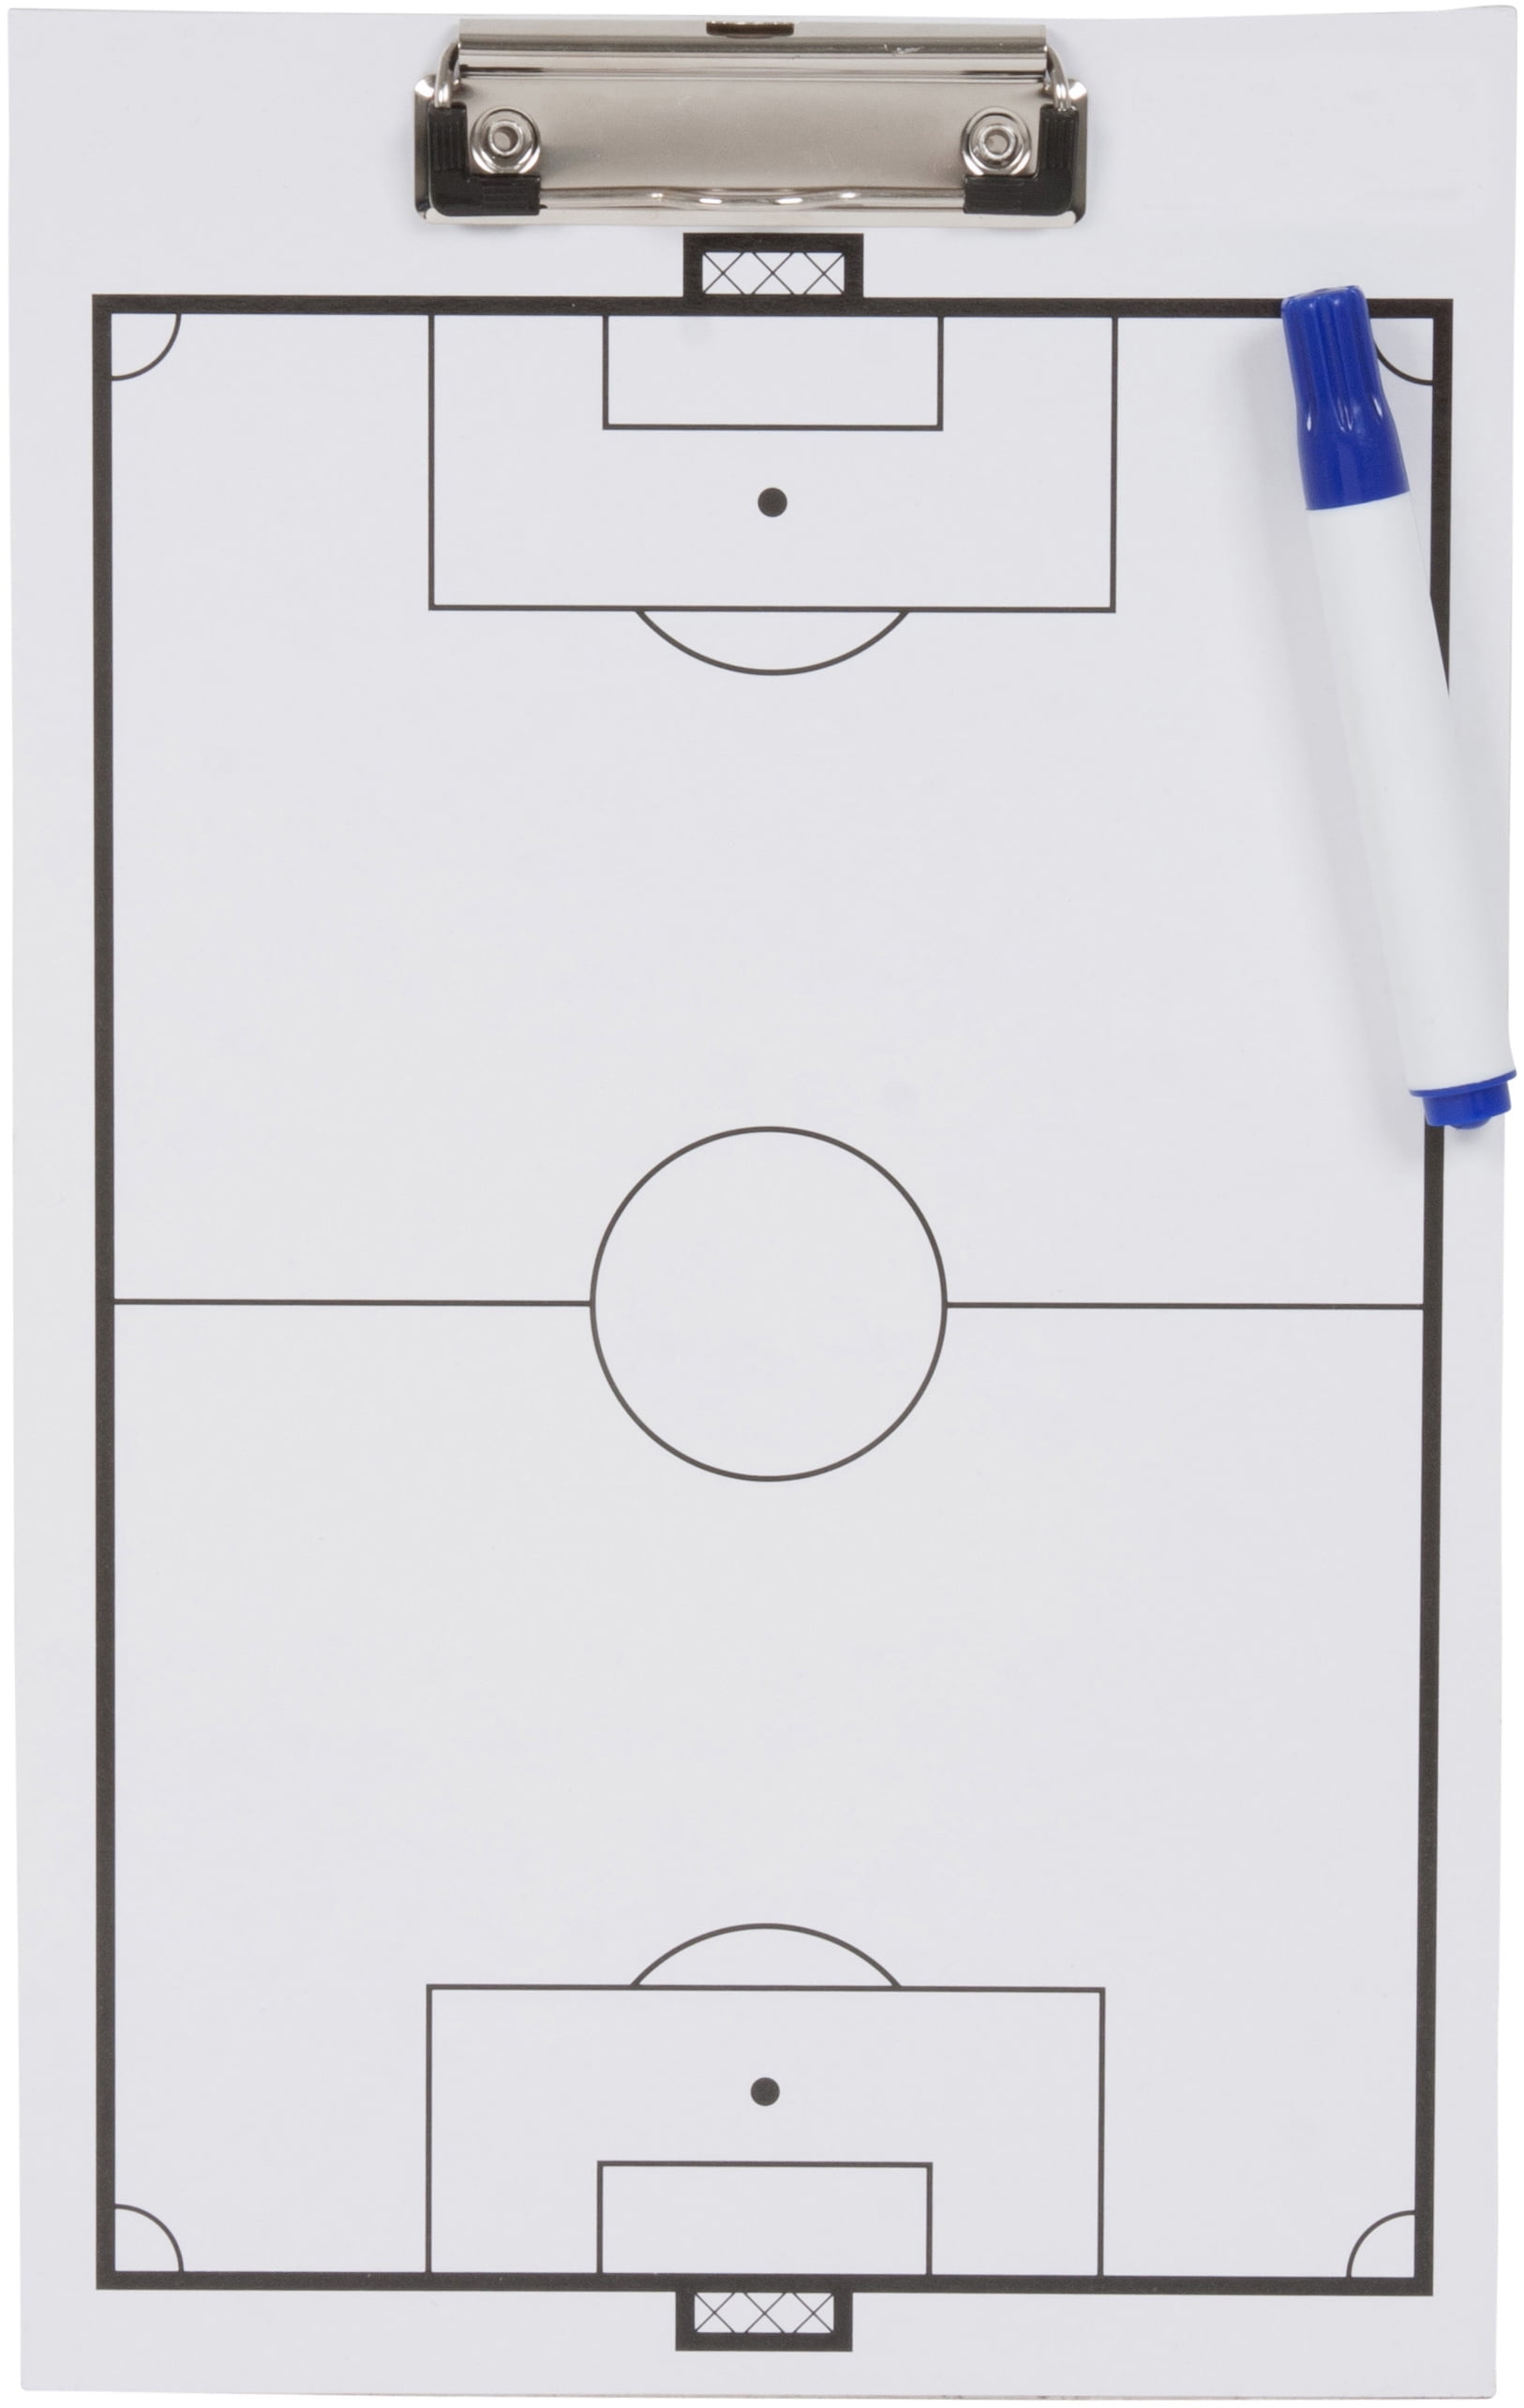 Hockey to Volleyball Shinestone Coaches Board Eraser and Whistle Coach Coaching Tactics Double Sided Premium Dry Erase Board Clipboard with Marker Pen Soccer Basketball Football from Baseball 